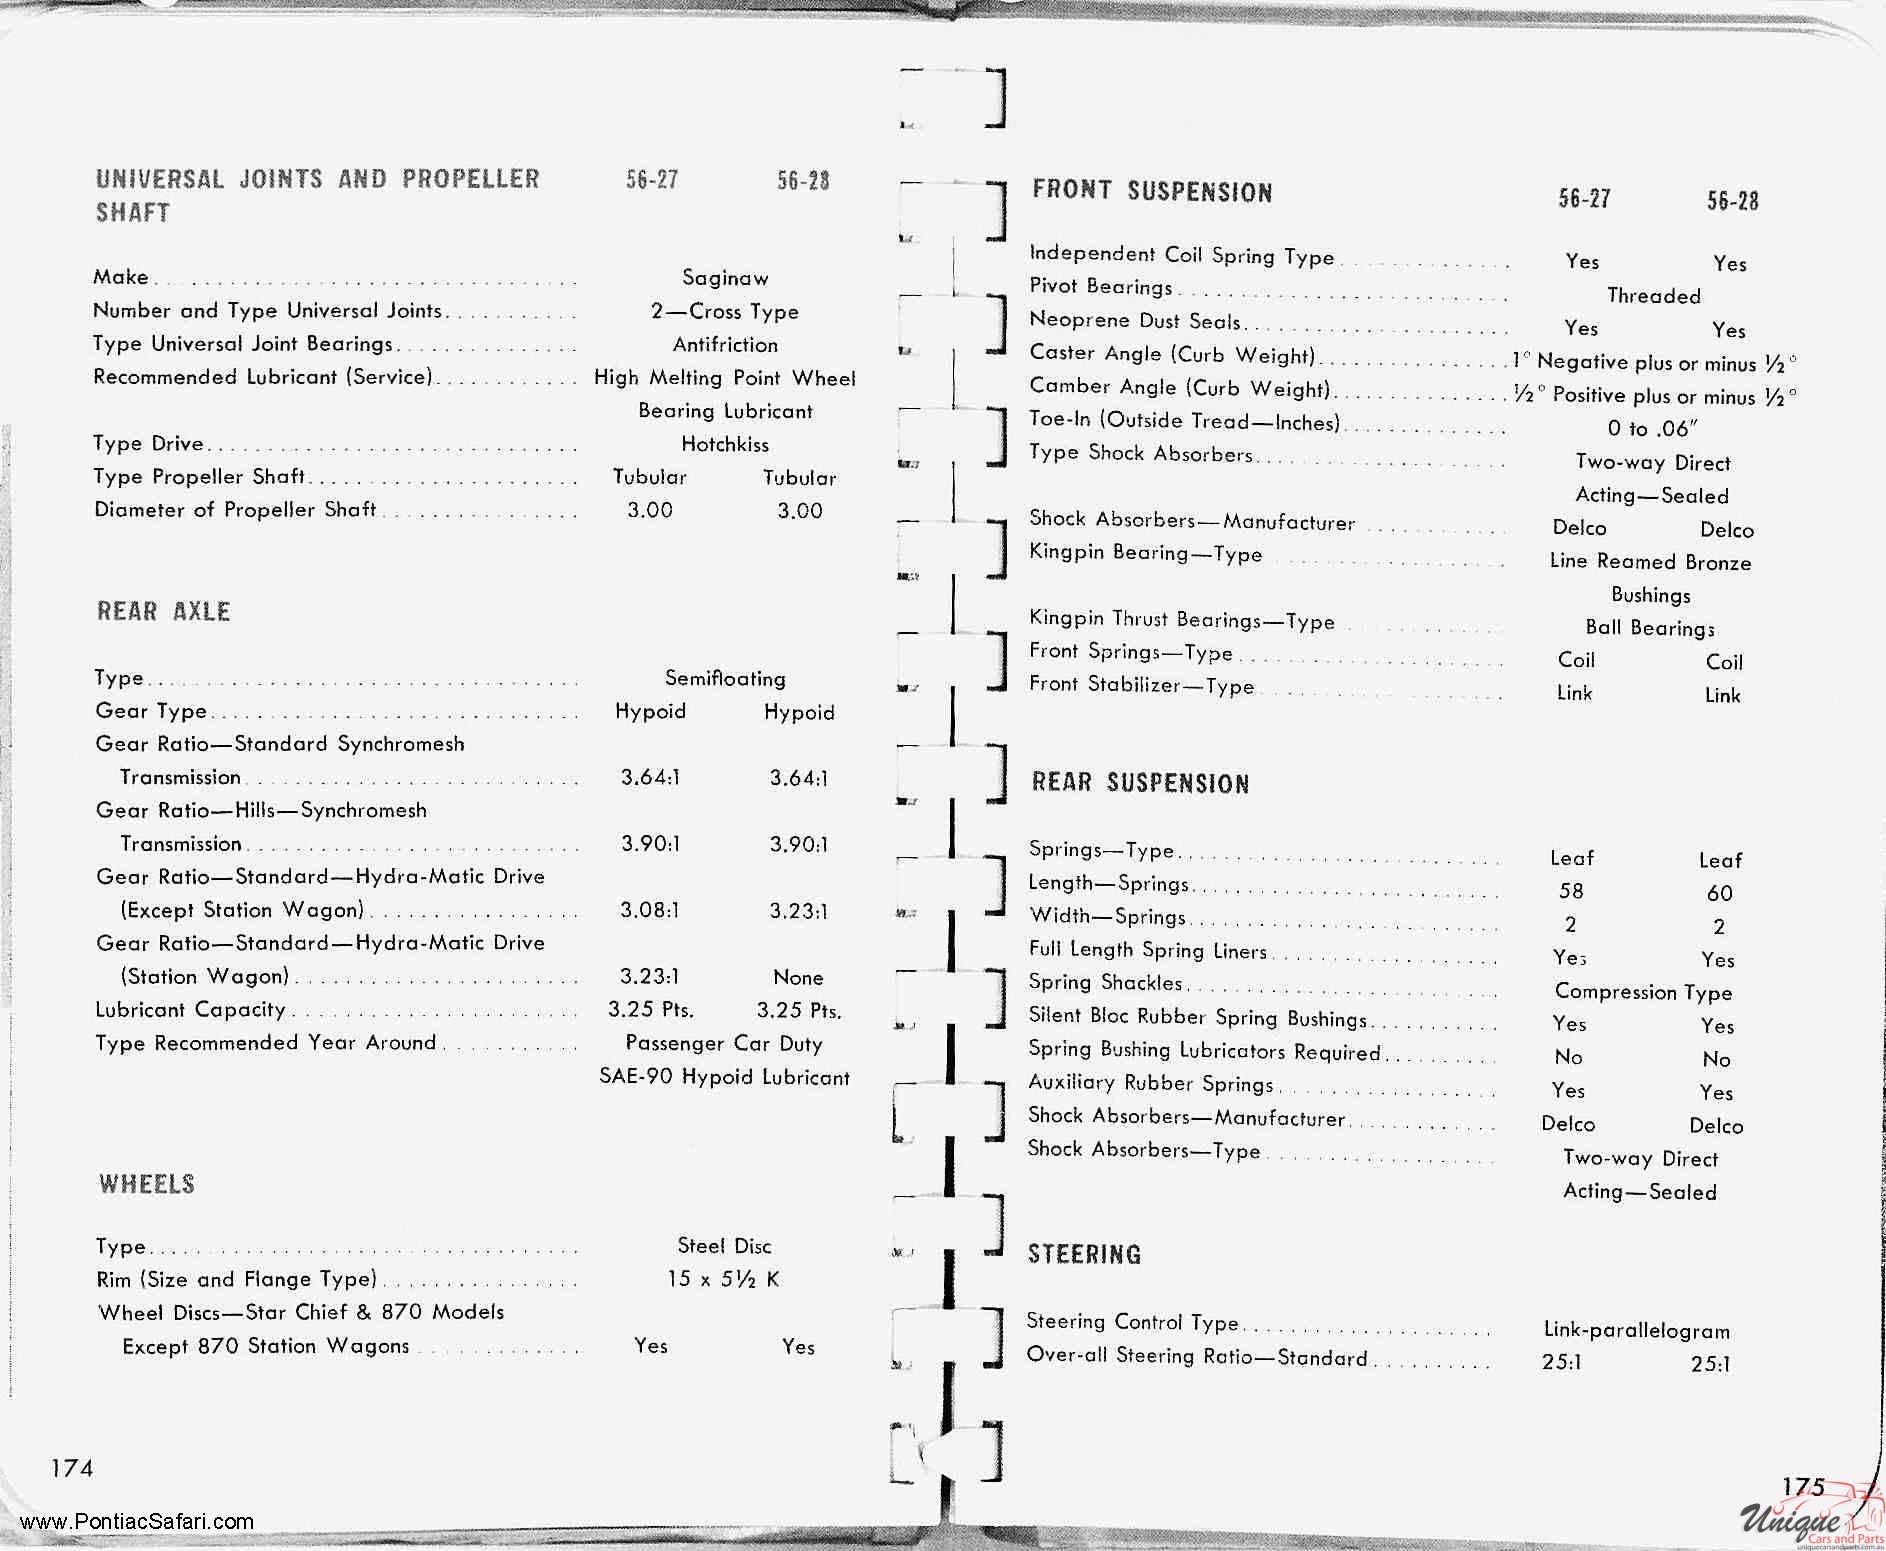 1956 Pontiac Facts Book Page 17